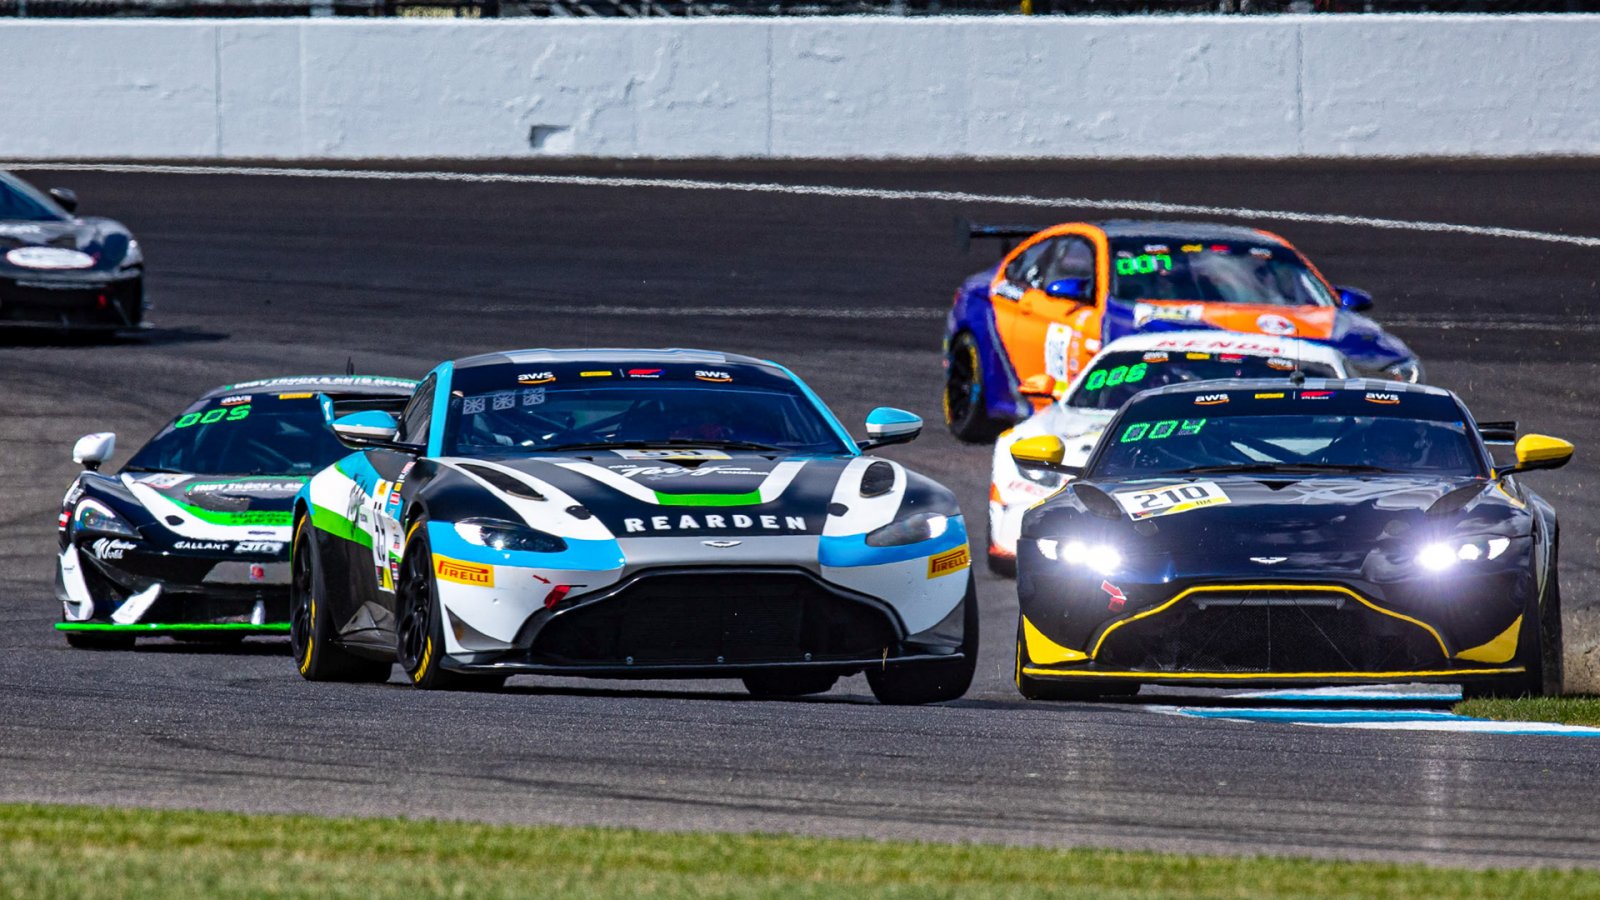 Paul Terry Records 2nd Places at Indy in Pirelli GT4 America Sprint Am; Utah Racer Takes 2nd in Season Points with Jeff Burton 3rd for Rearden Racing